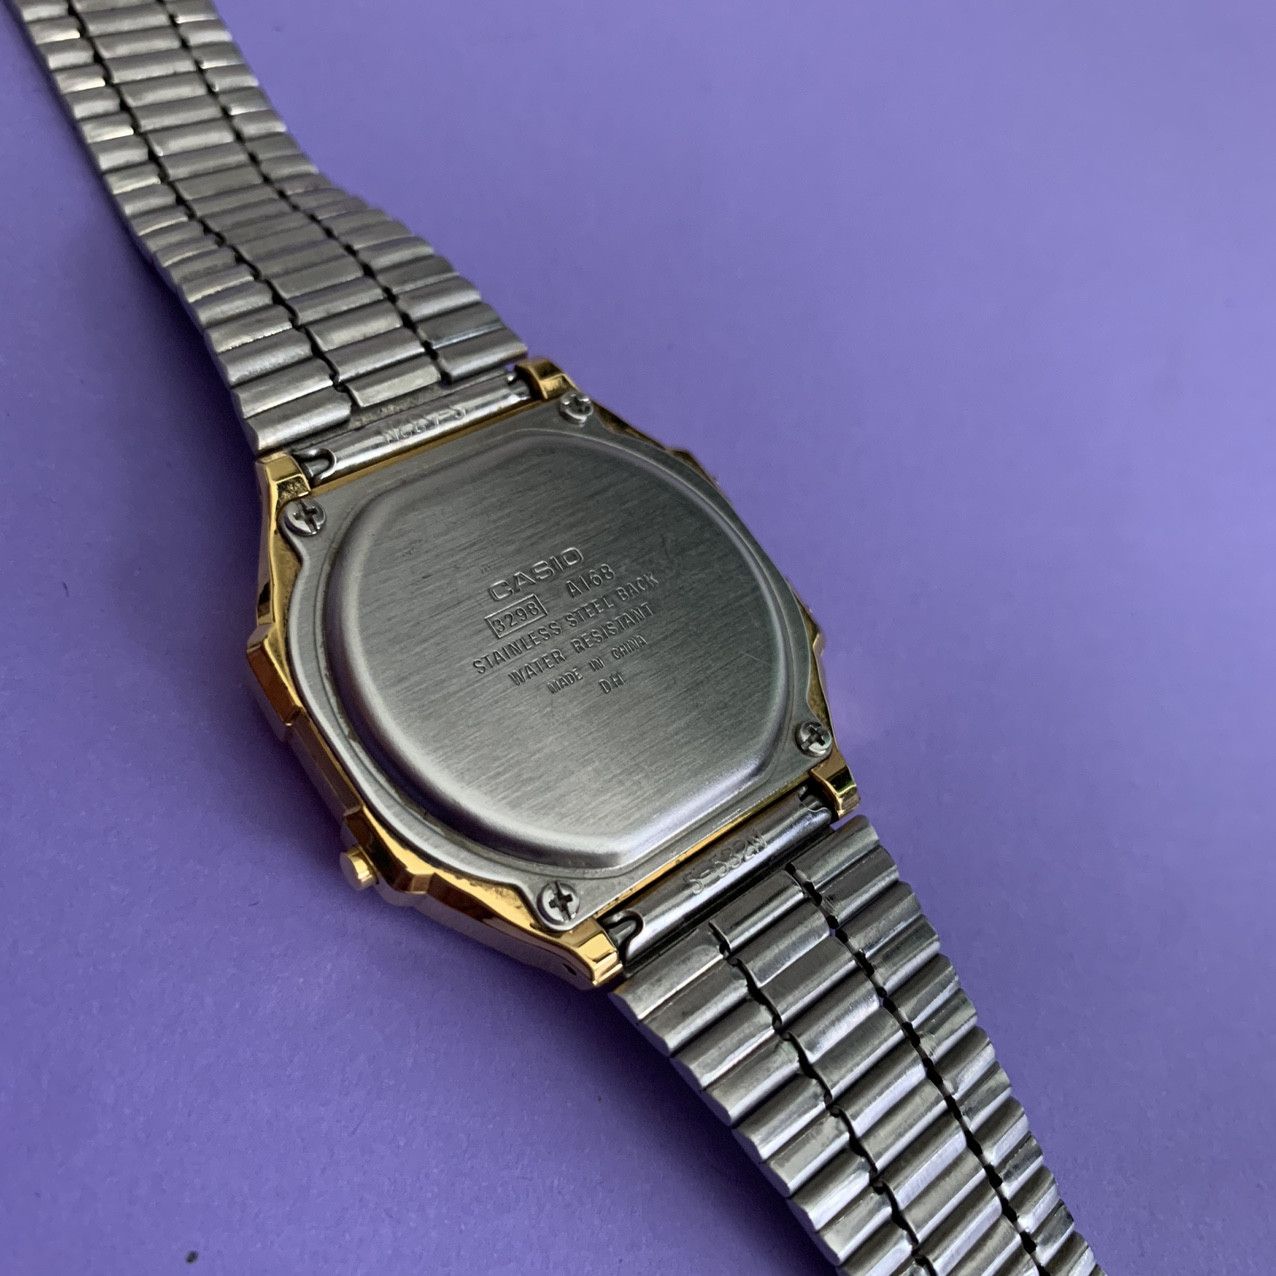 Vintage Gold Casio Vintage Style Watch A158W Size ONE SIZE - 2 Preview